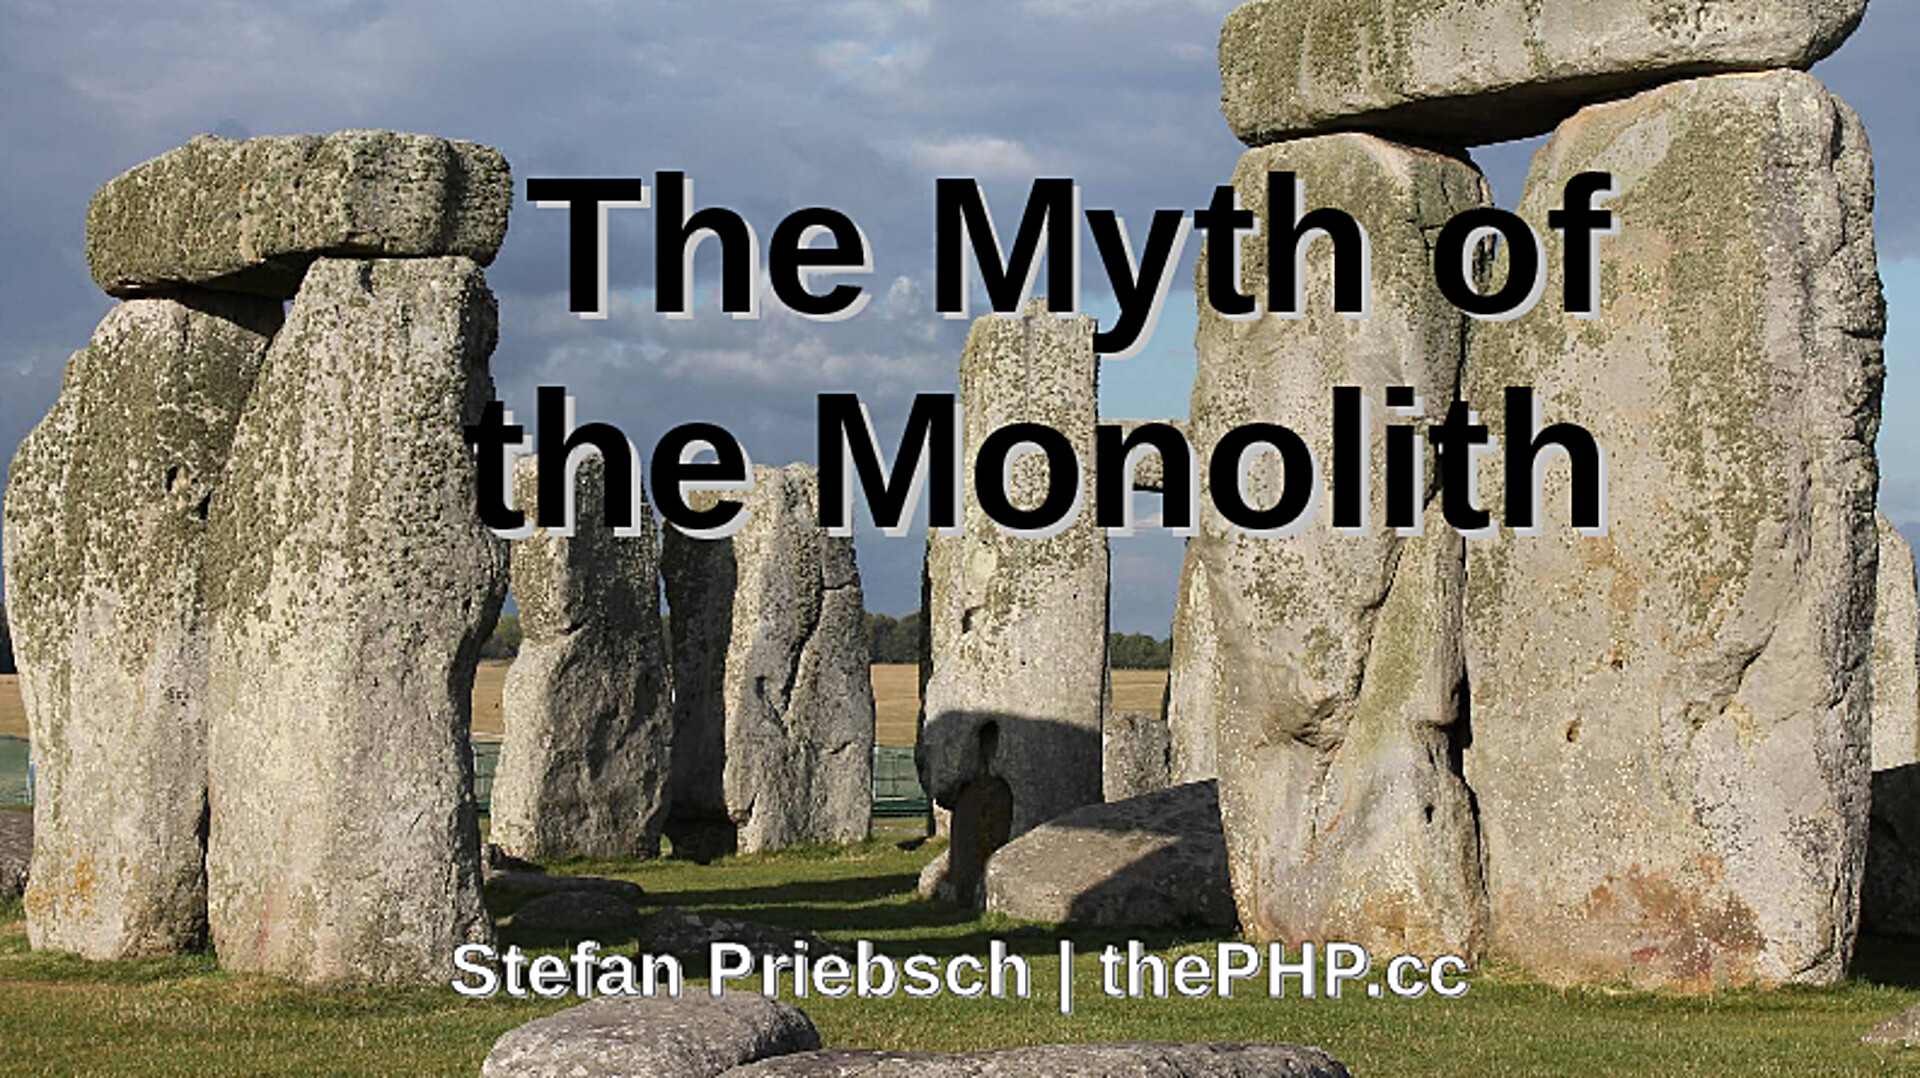 The Myth of the Monolith